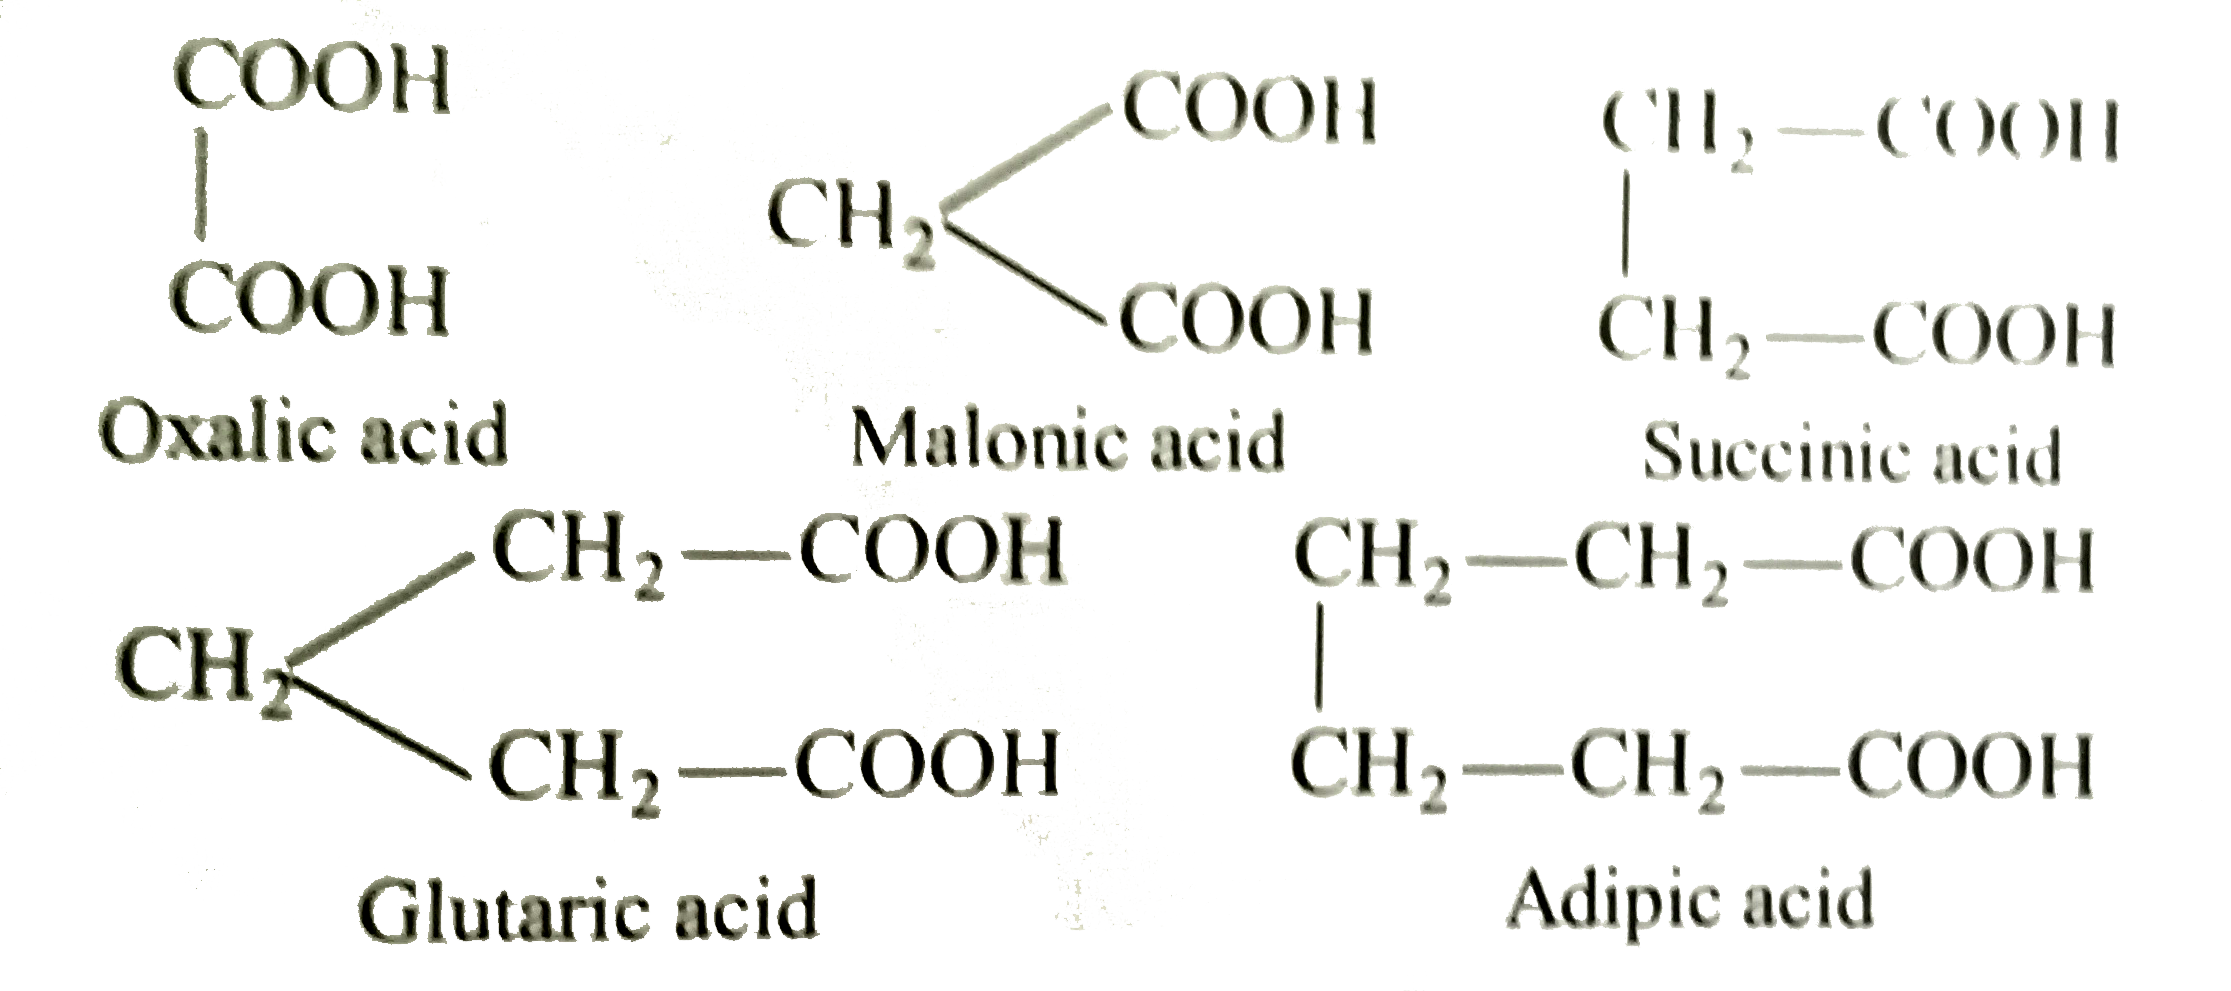 Dicarboxylic acids have two carboxylic groups, e.g.,      Acidity of dicarboxylic acid depends upon the stability of intermediate ion and upon the distance between two carboxylic groups. Shorter the distance between two carboxylic groups, greater is the acidic character. Melting point of these acids depends on the symmetry. Greater the symmetry, higher will be the melting point.   Dicarboxylic acids on heating give monocarboxylic acid allkanes, cyclic ketones depending on the conditions   Which of the following dicarboxylic acids, will give monocarboxylic acid on heating ?